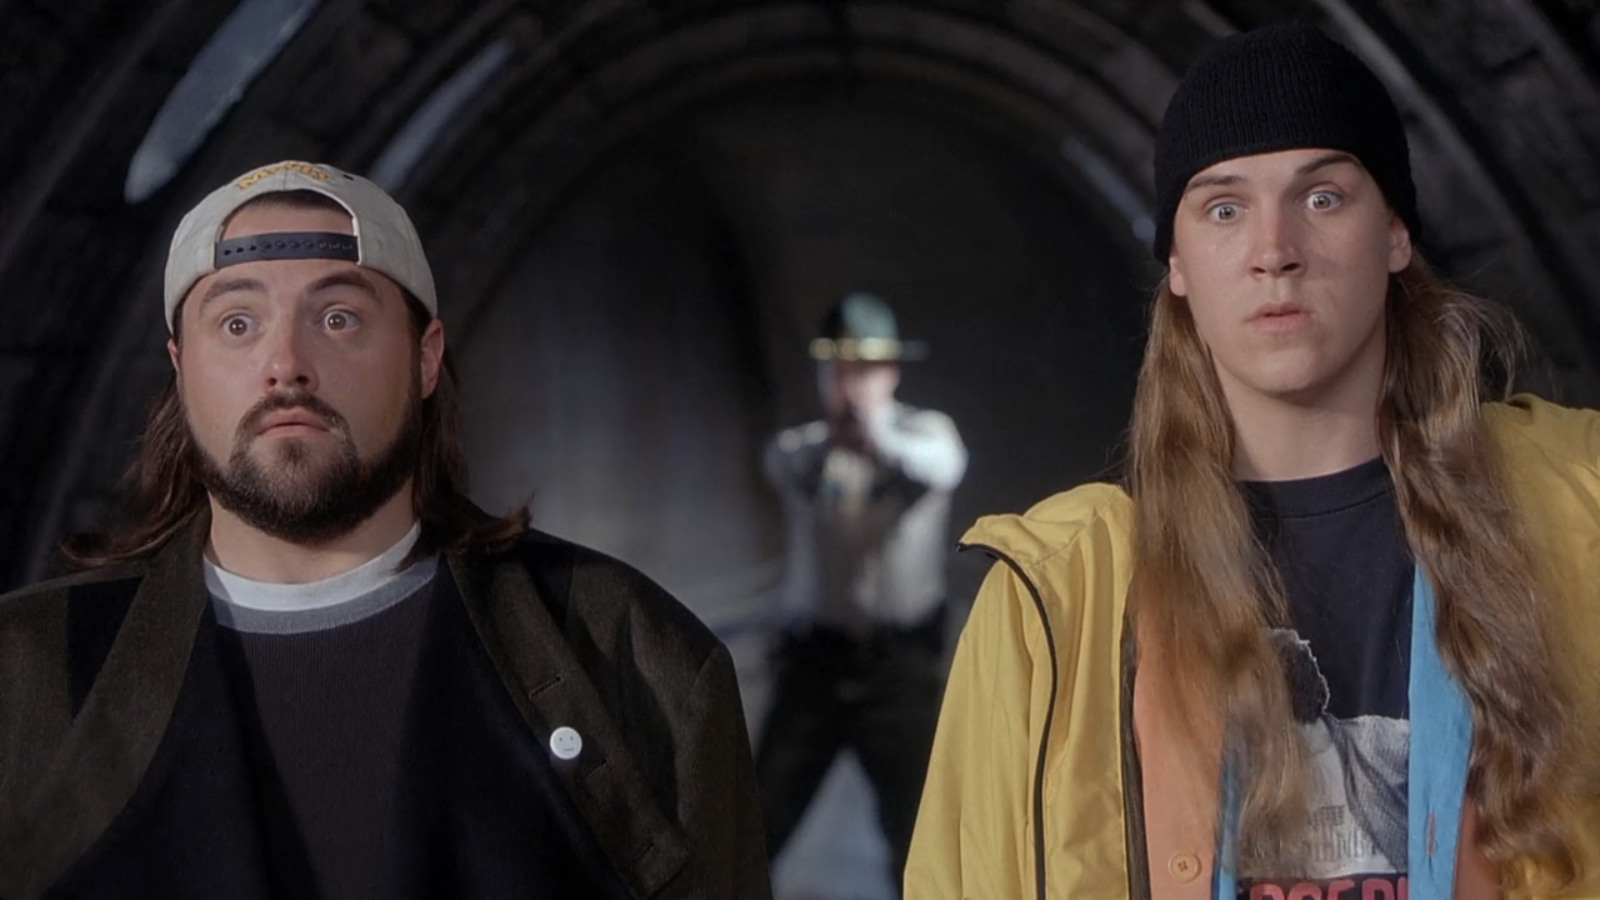 Jay And Silent Bob Strike Back Wallpapers